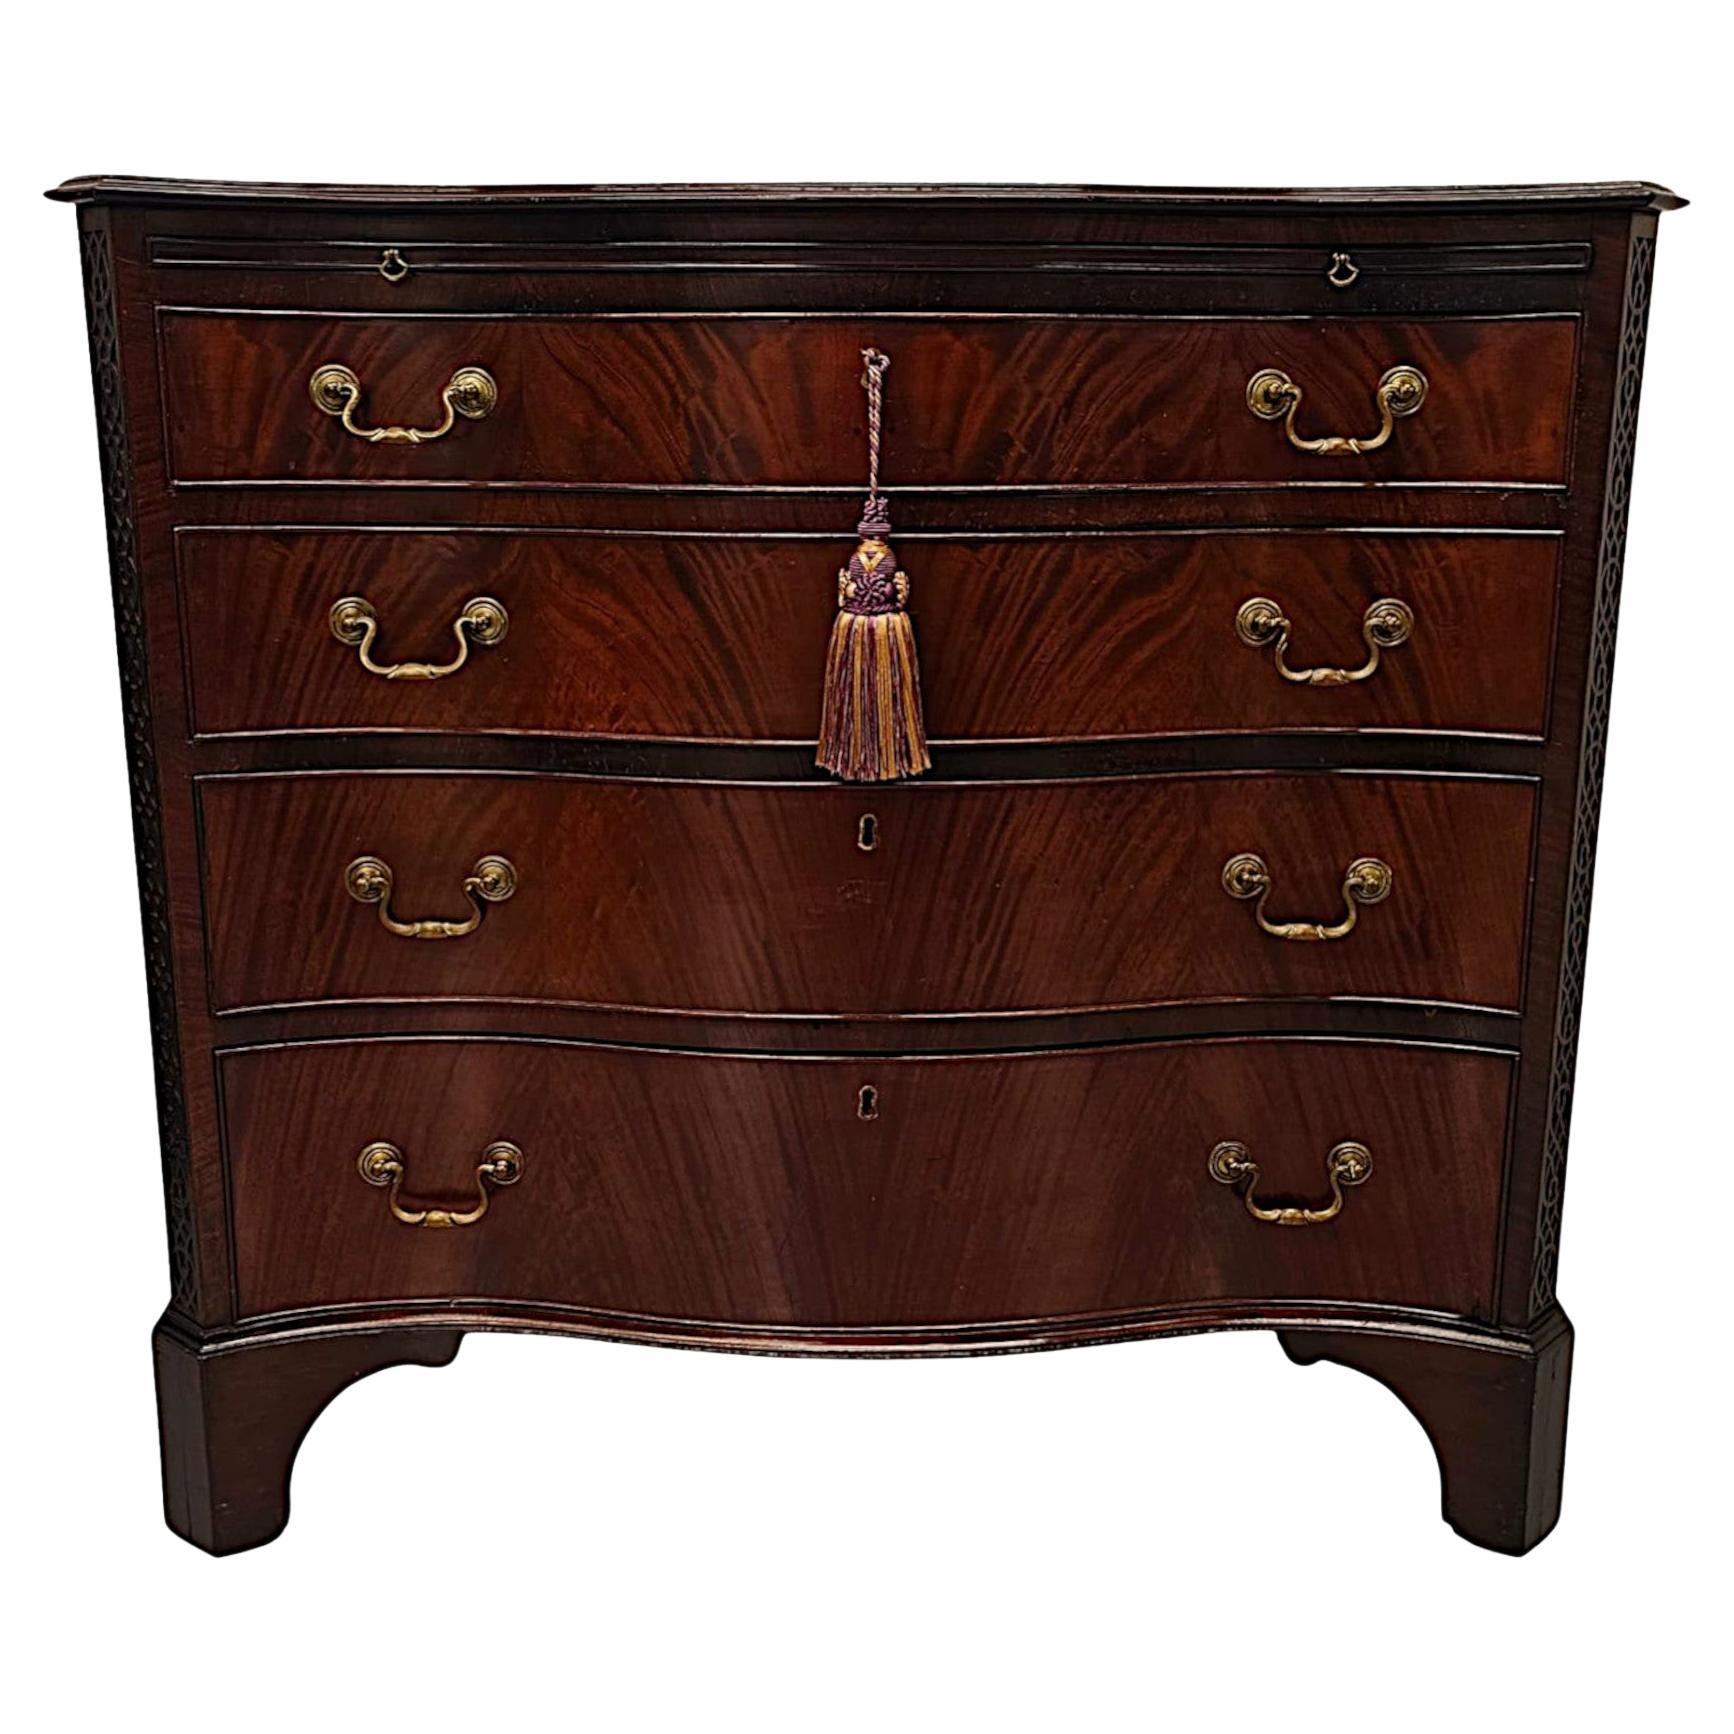 A Very Fine Early 20th Century Serpentine Chest of Drawers